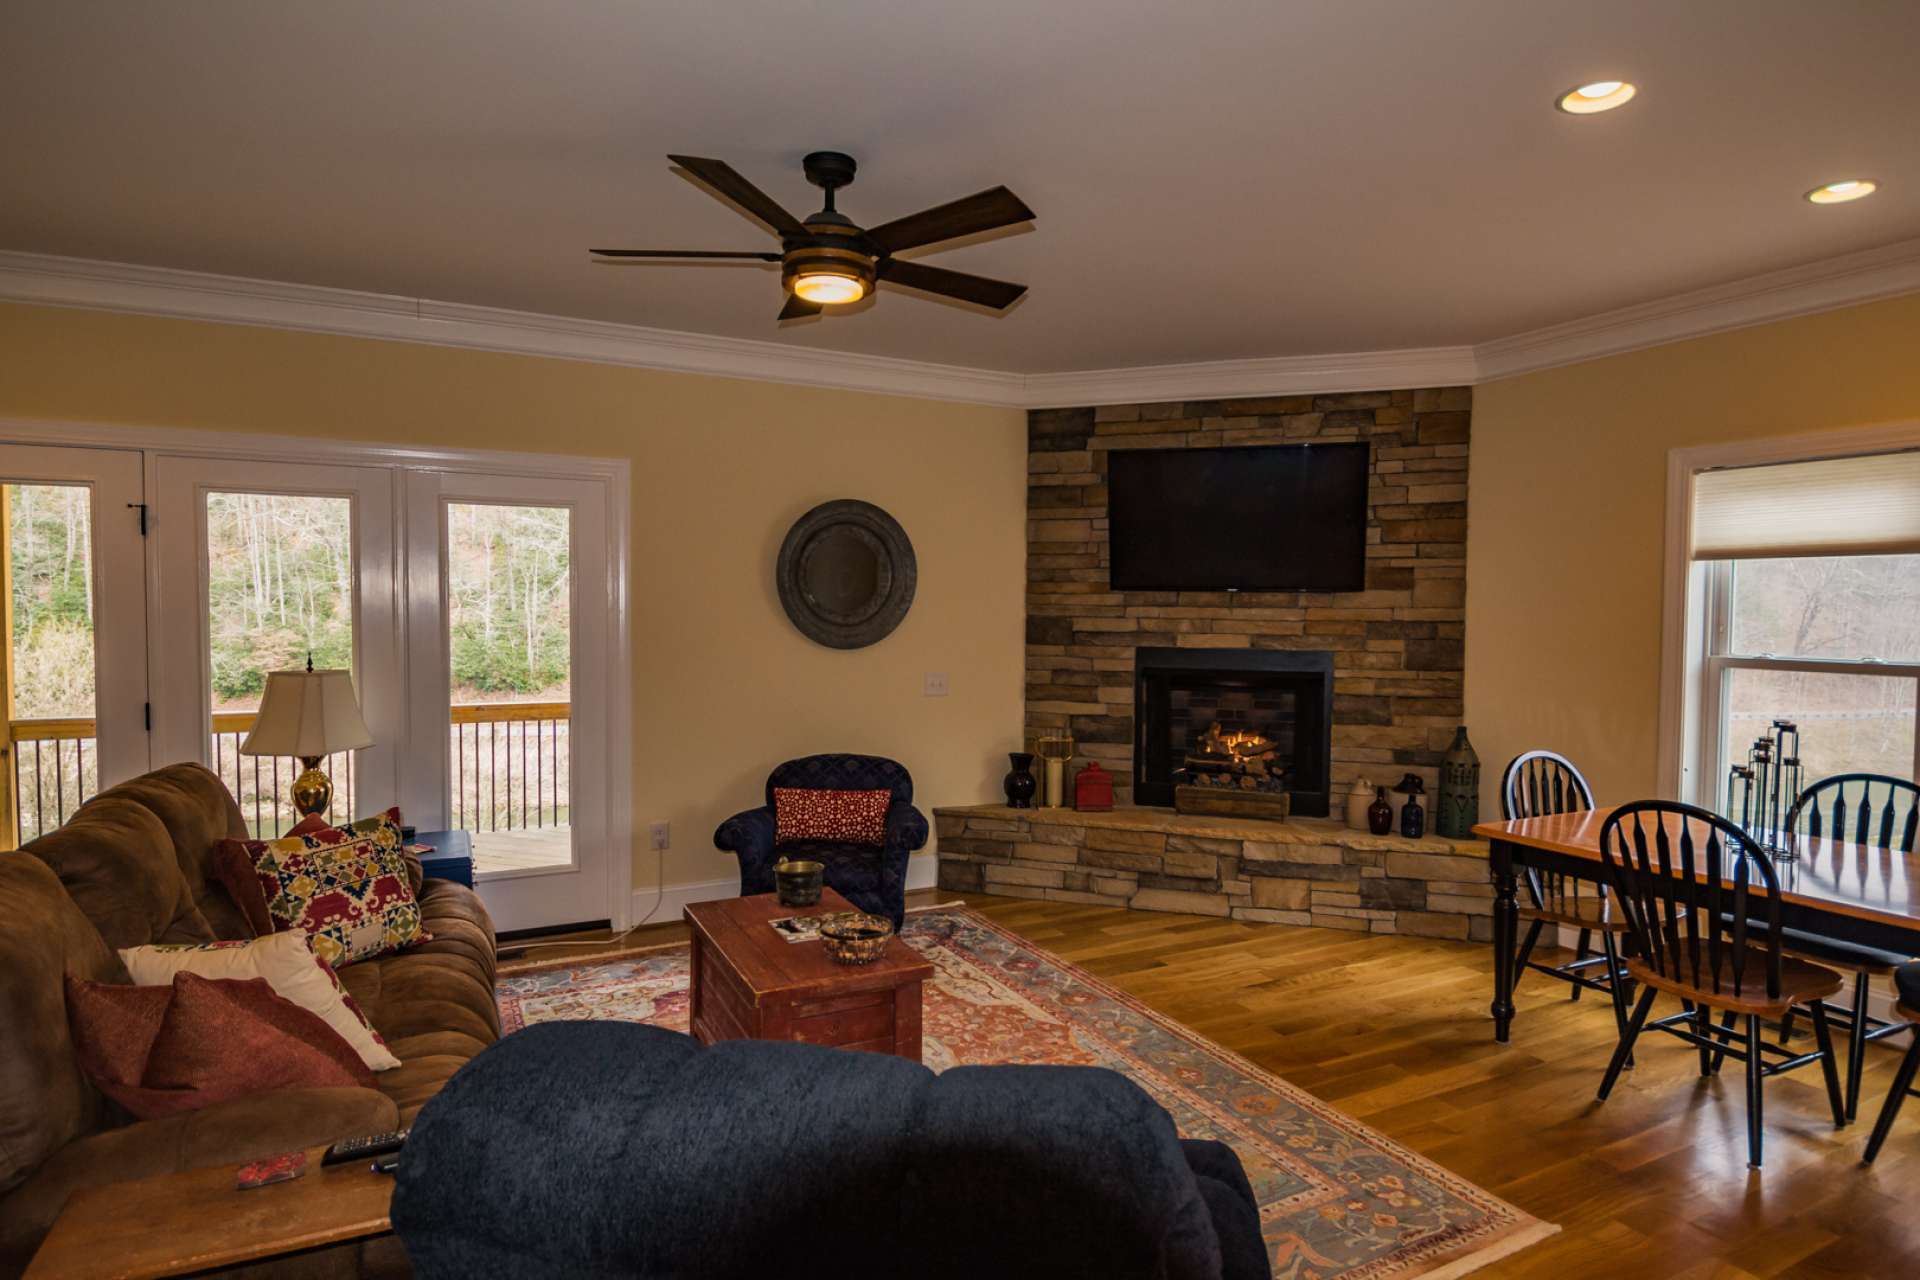 Entering the home, you are drawn to the cozy stone fireplace with gas logs in the great room where beautiful Oak floors enhance the warm feel of the home.